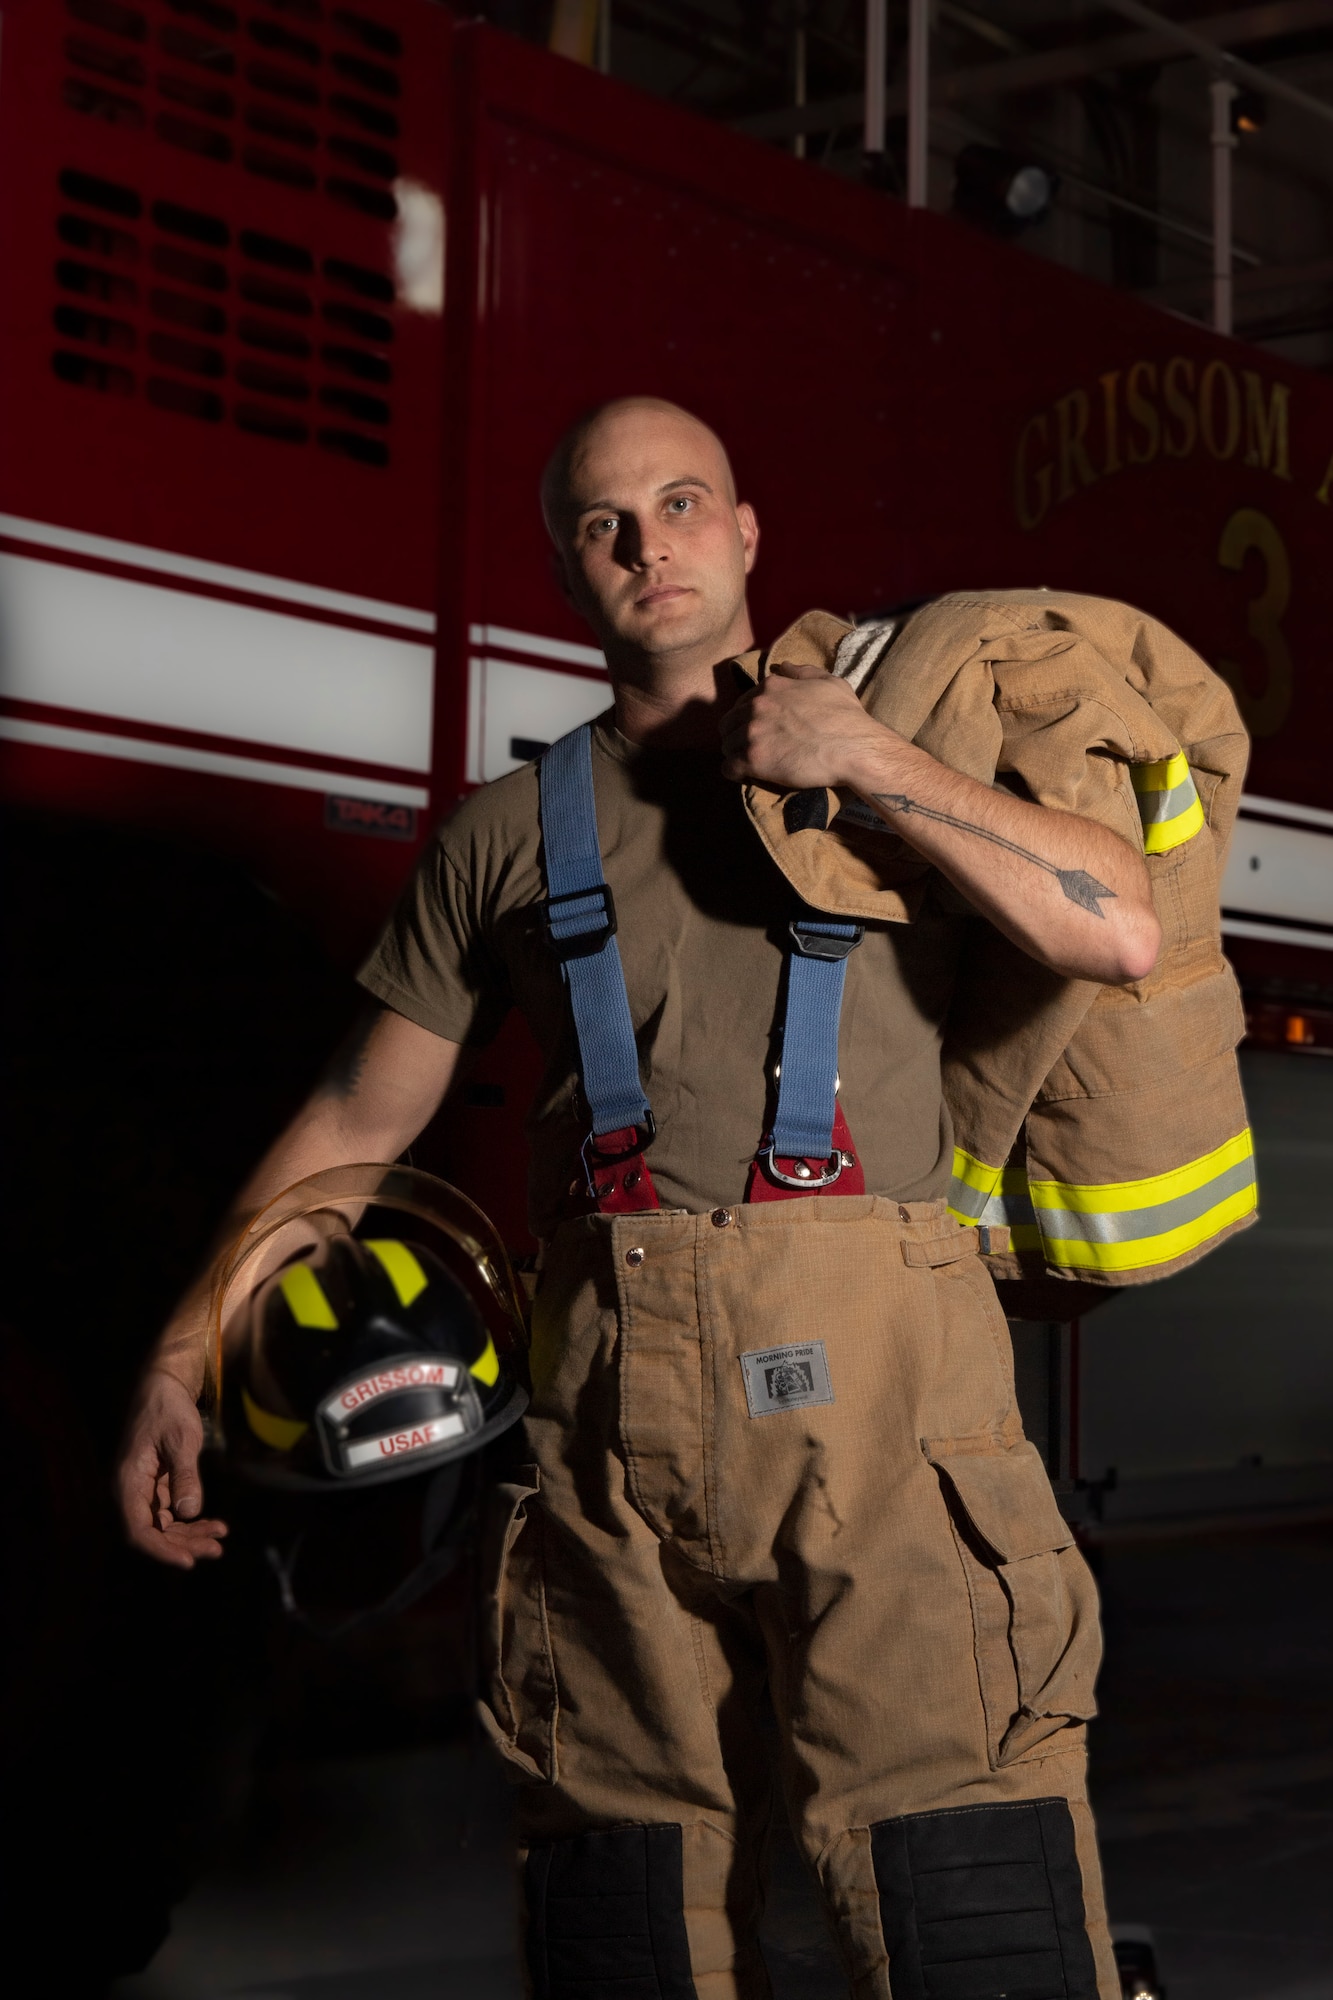 434th Air Refueling Wing Non-Commissioned Officer of the Year

Staff Sgt. Andrew Davenport, firefighter, 434th Civil Engineer Squadron

Staff Sgt. Davenport is a large part of Grissom’s fire department being Air Force Reserve Command’s only fire house with four national and DoD accreditations. During 2021 he not only completed 544 hours of training at the Fire Academy, but he earned the academy’s top graduate honors, but the recognition doesn’t stop there. He was recently named AFRC’s Fire Fighter of the year.  Davenport also revamped the fire departments upgrade training program which resulted in their certification time being cut by 50 percent. (U.S. Air Force photo by Tech Sgt. Josh Weaver)